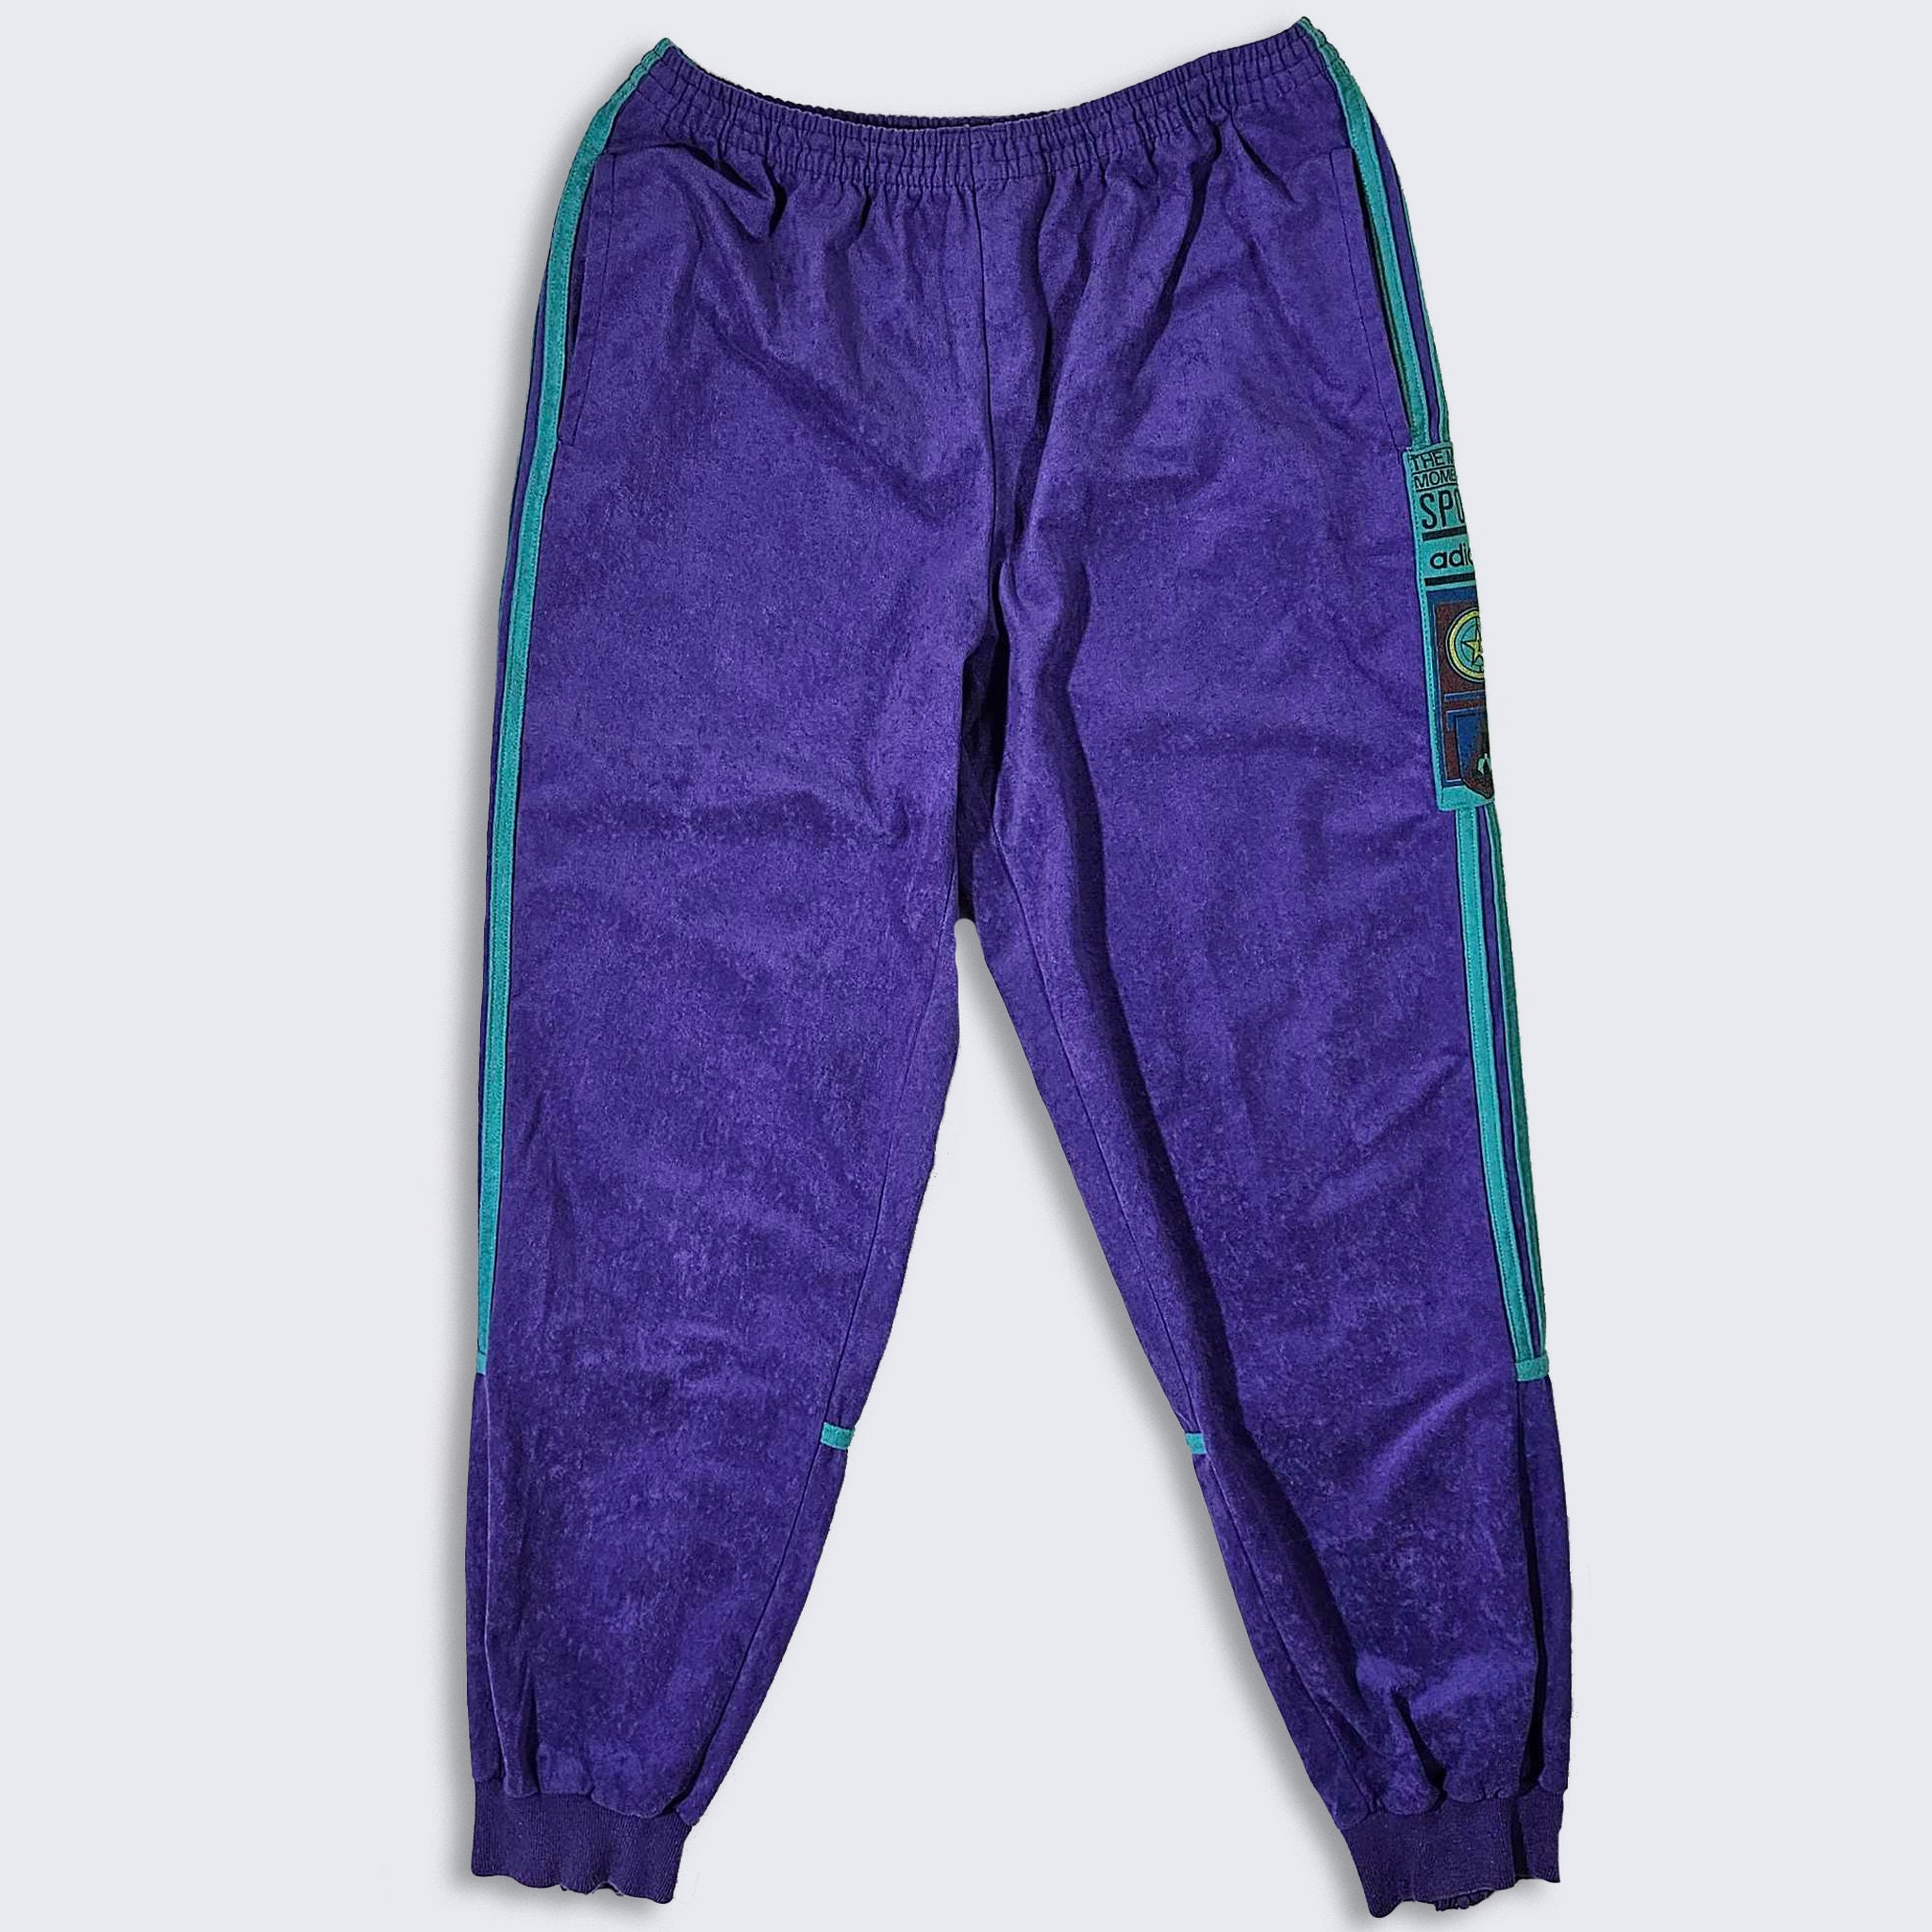 Adidas Vintage 90s Purple Suede Joggers Pants the Magic Moment of